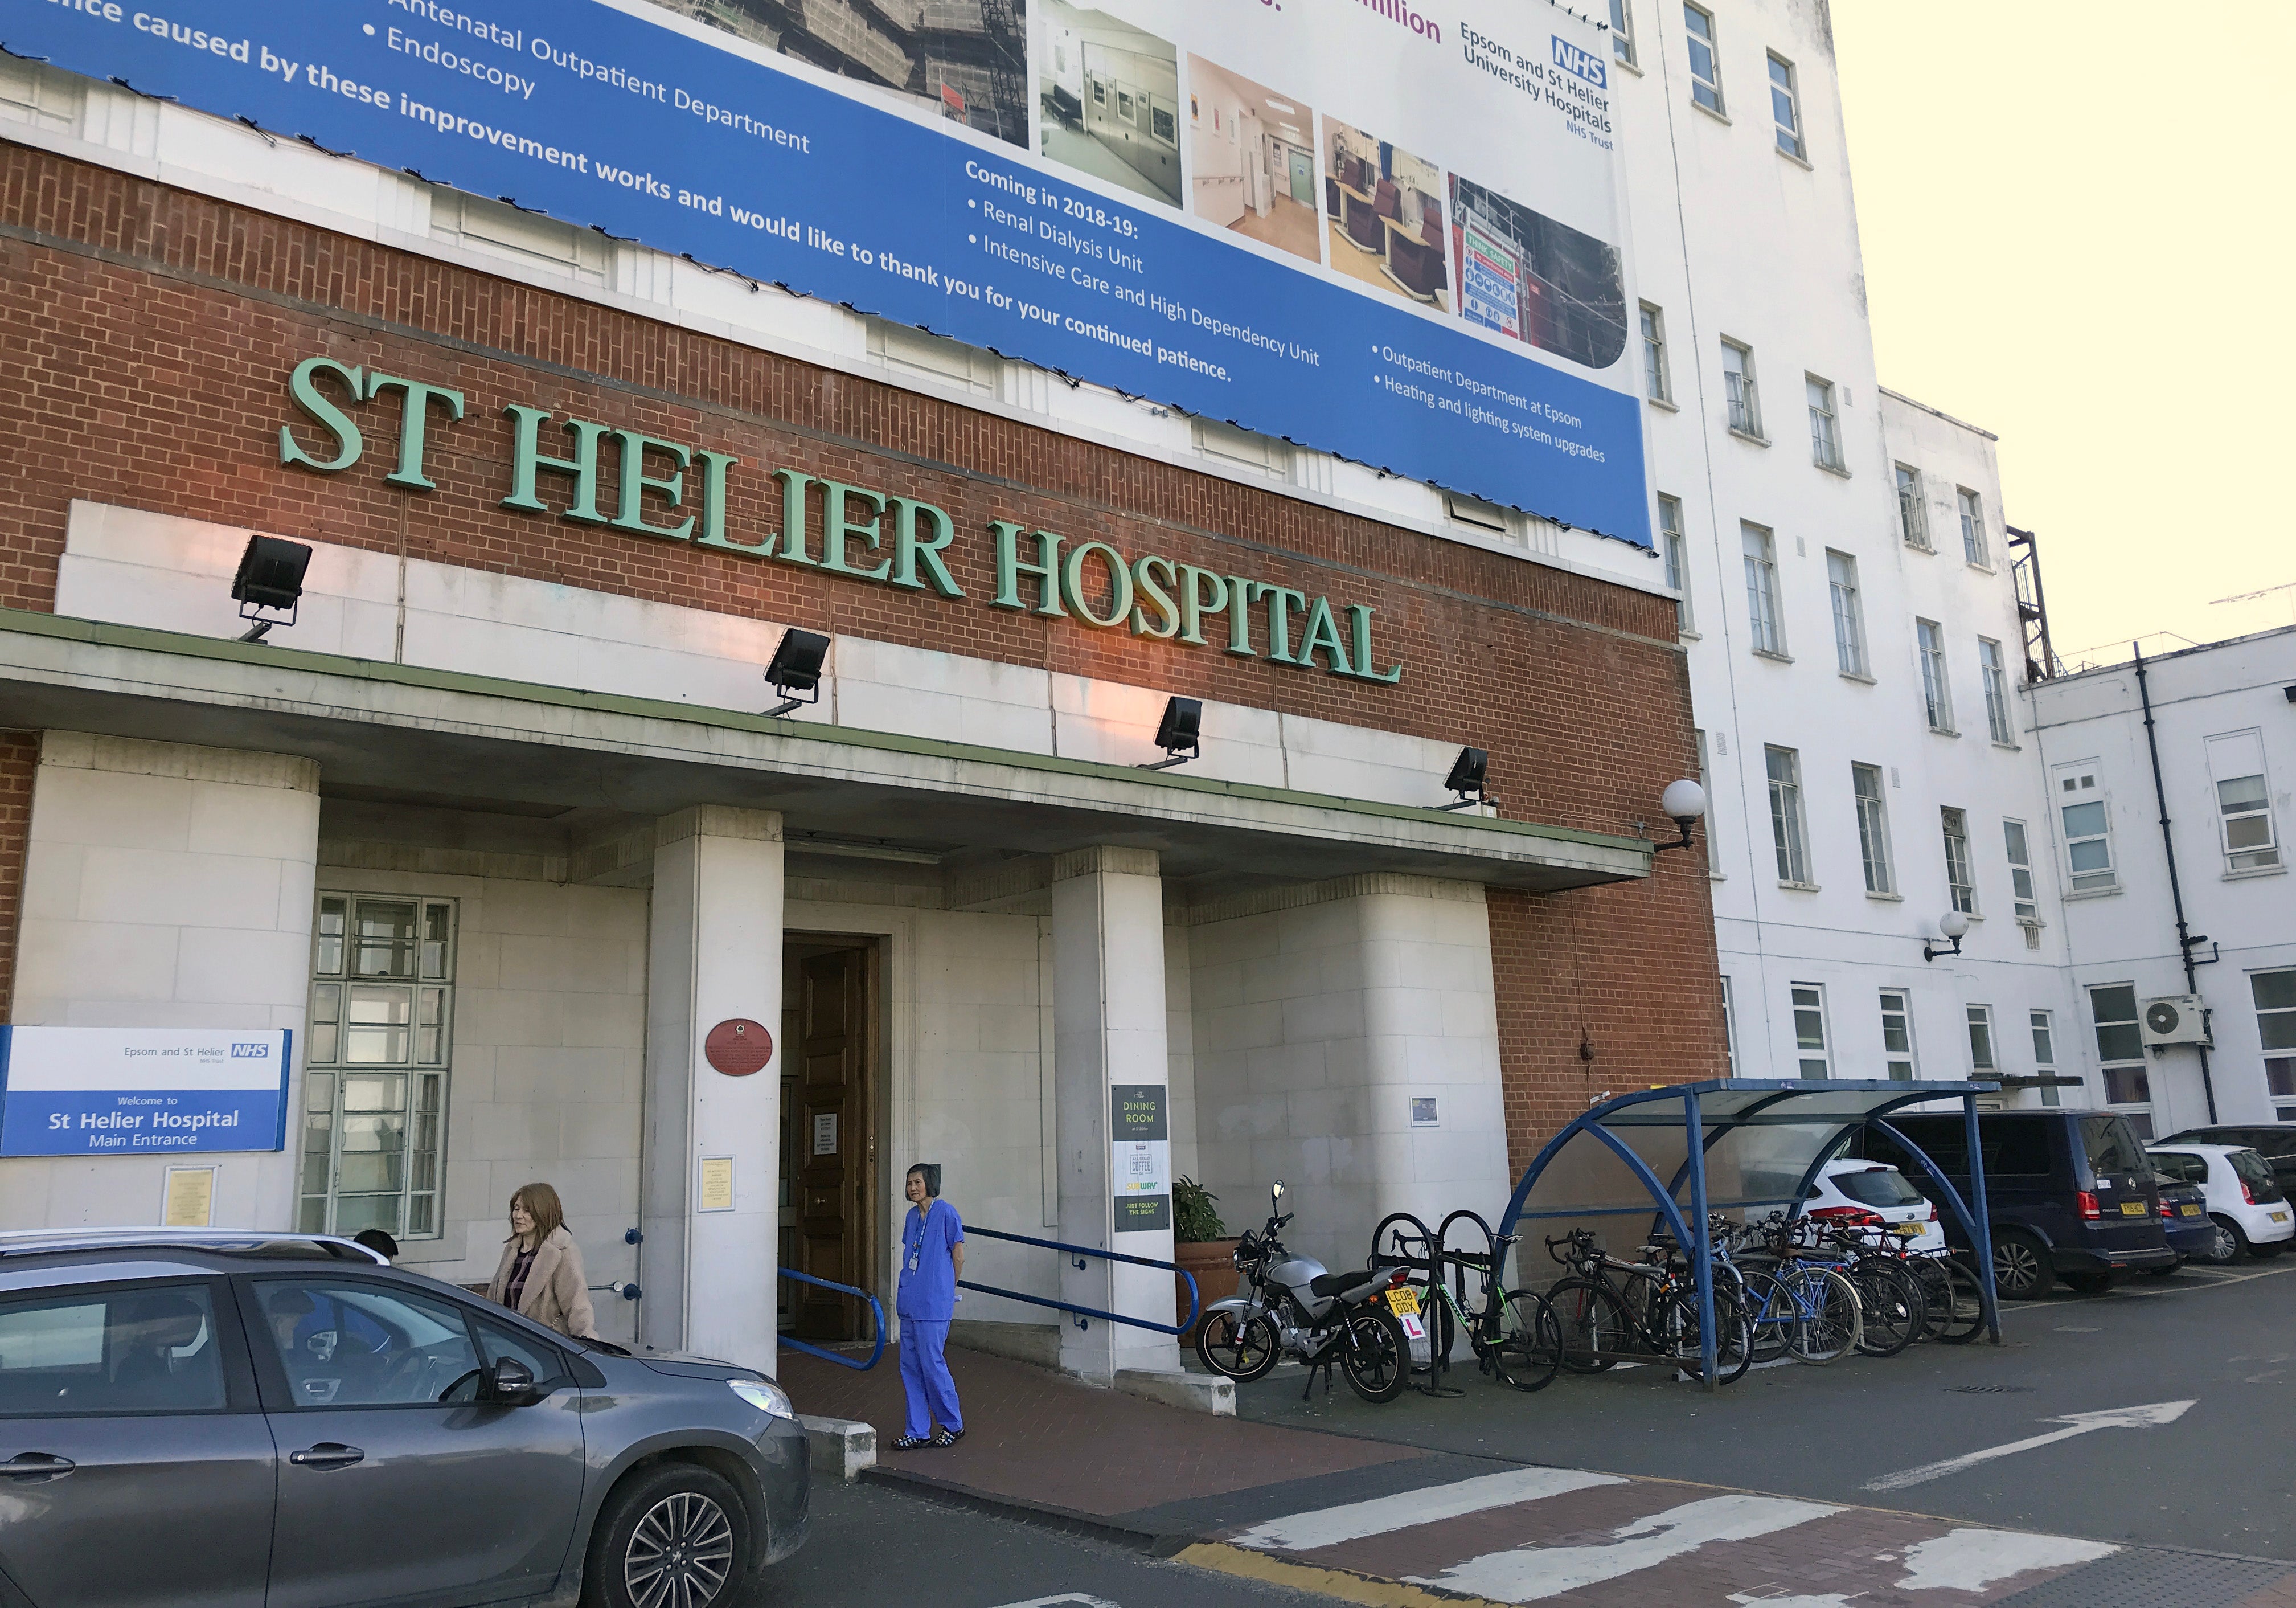 St Helier Hospital in Sutton, south London, has had to divert patients because of oxygen concerns